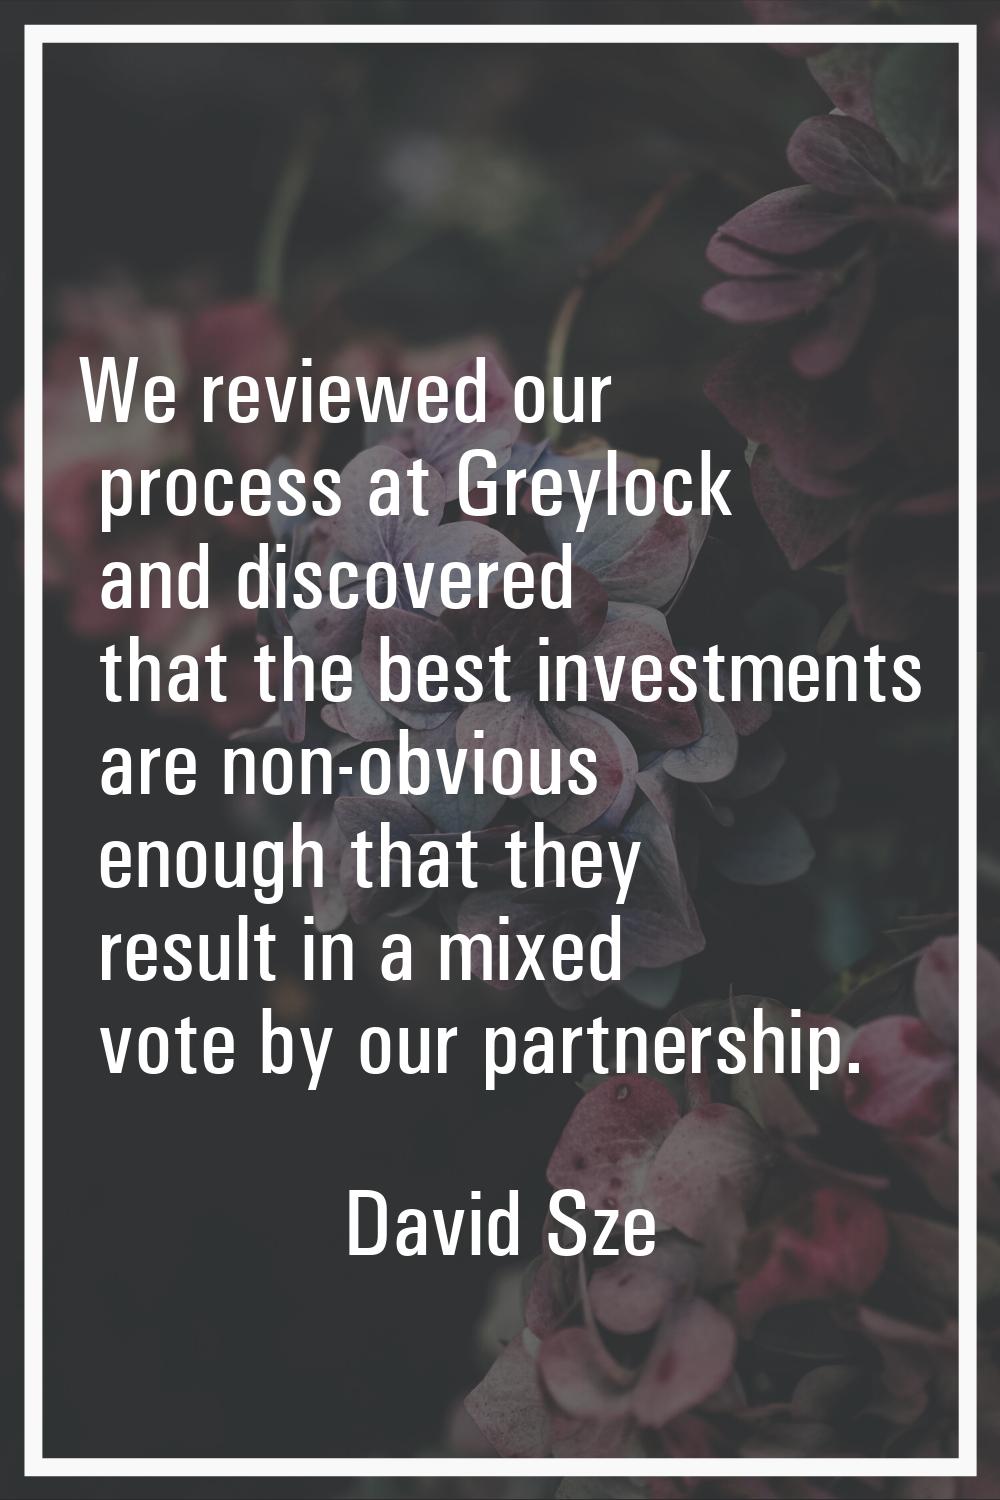 We reviewed our process at Greylock and discovered that the best investments are non-obvious enough